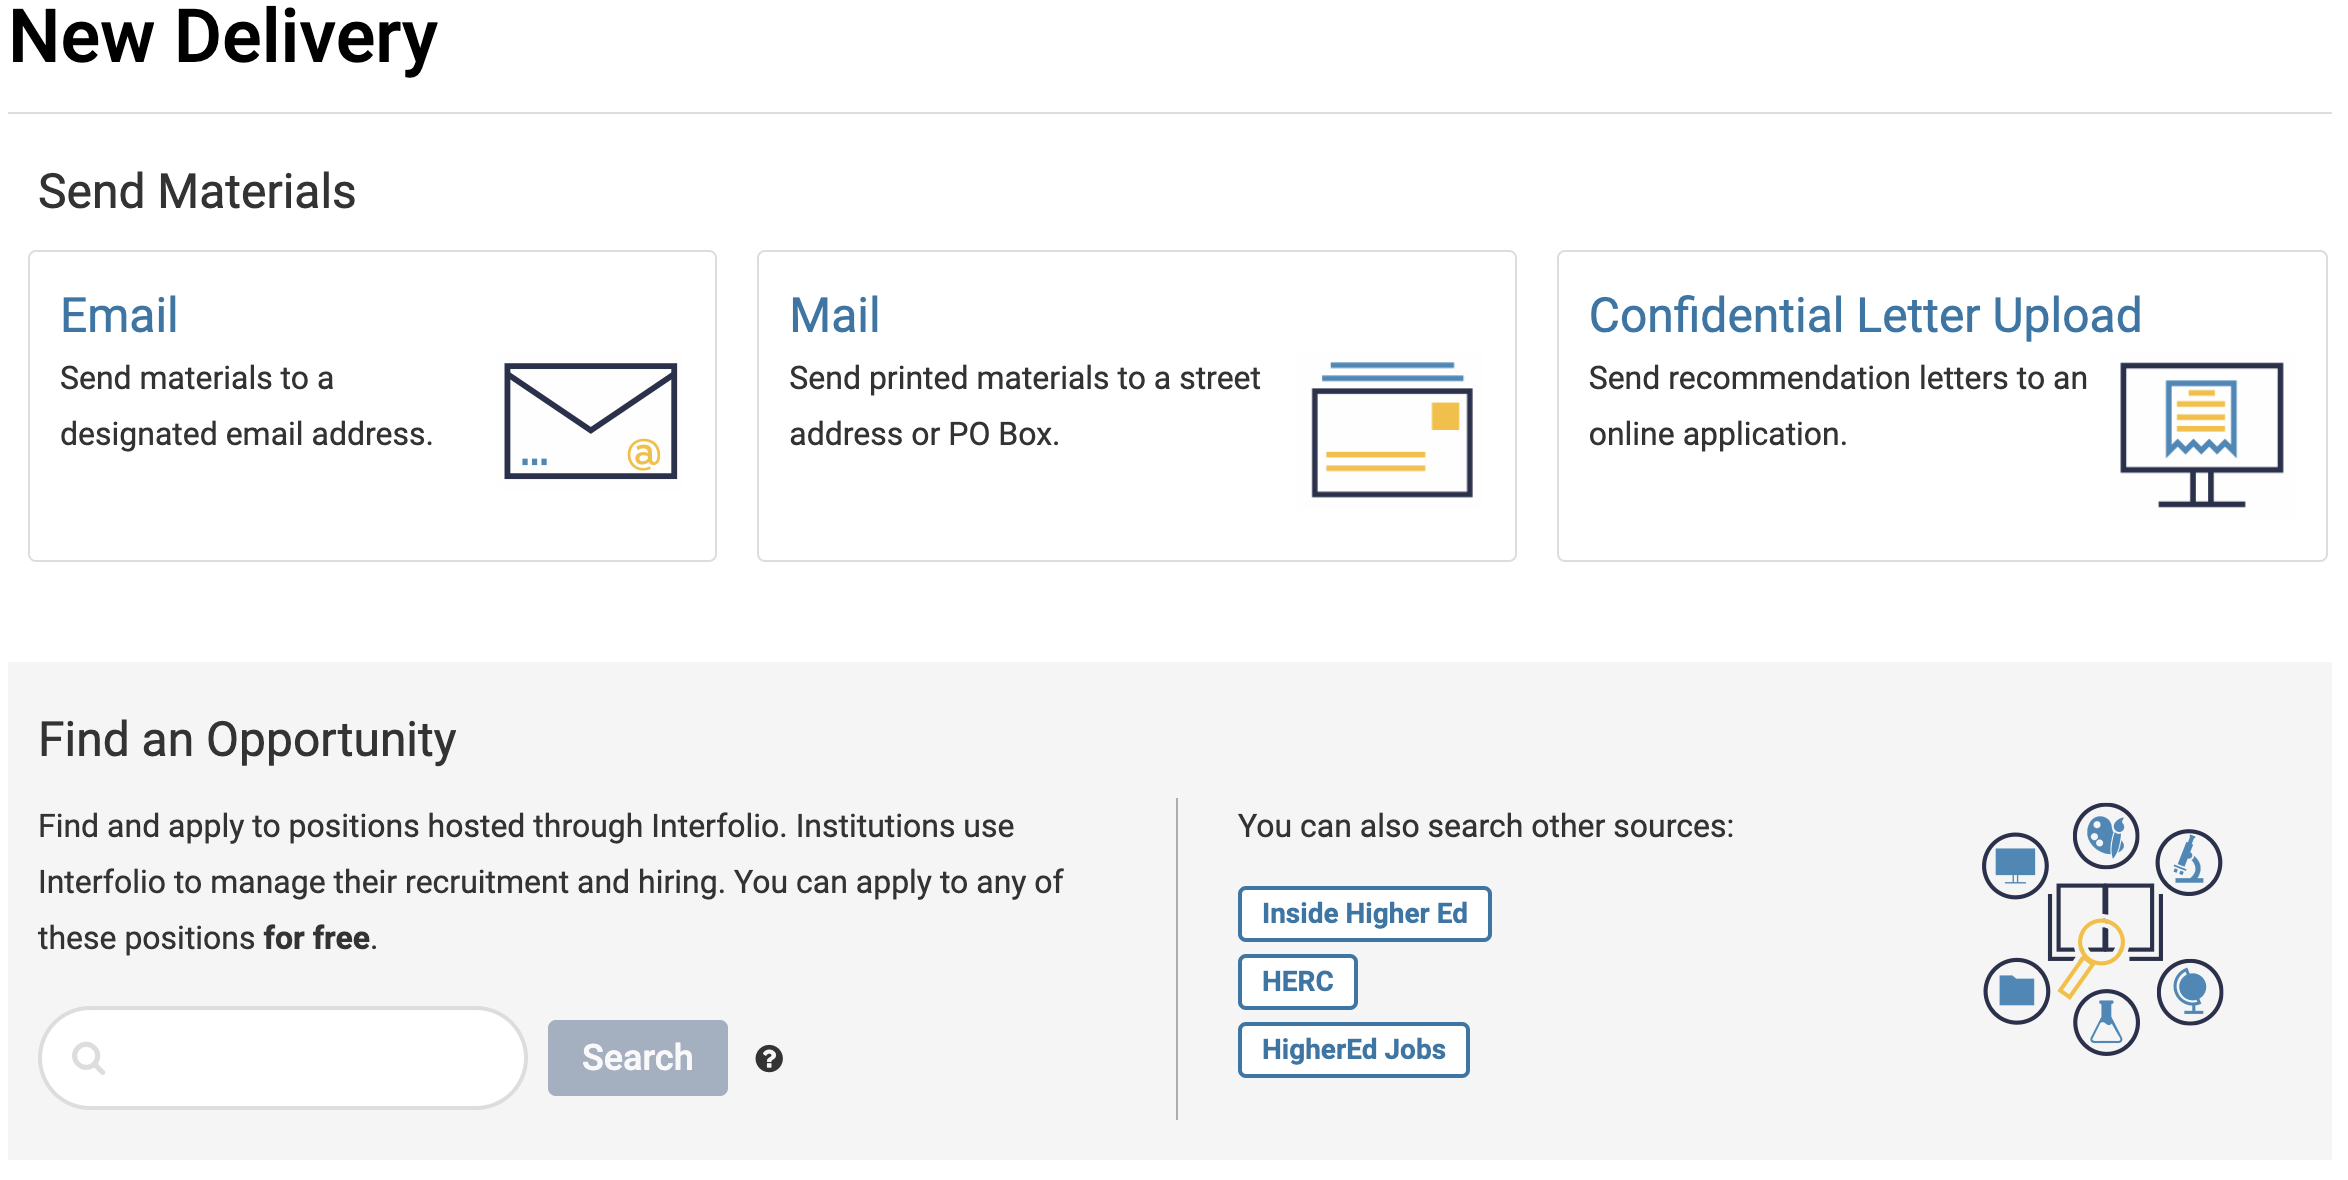 New Delivery Page with Email, Mail, and COnfidential Letter Upload selections below the Send Materials section and a search bar below that in the Find and Opportunity section